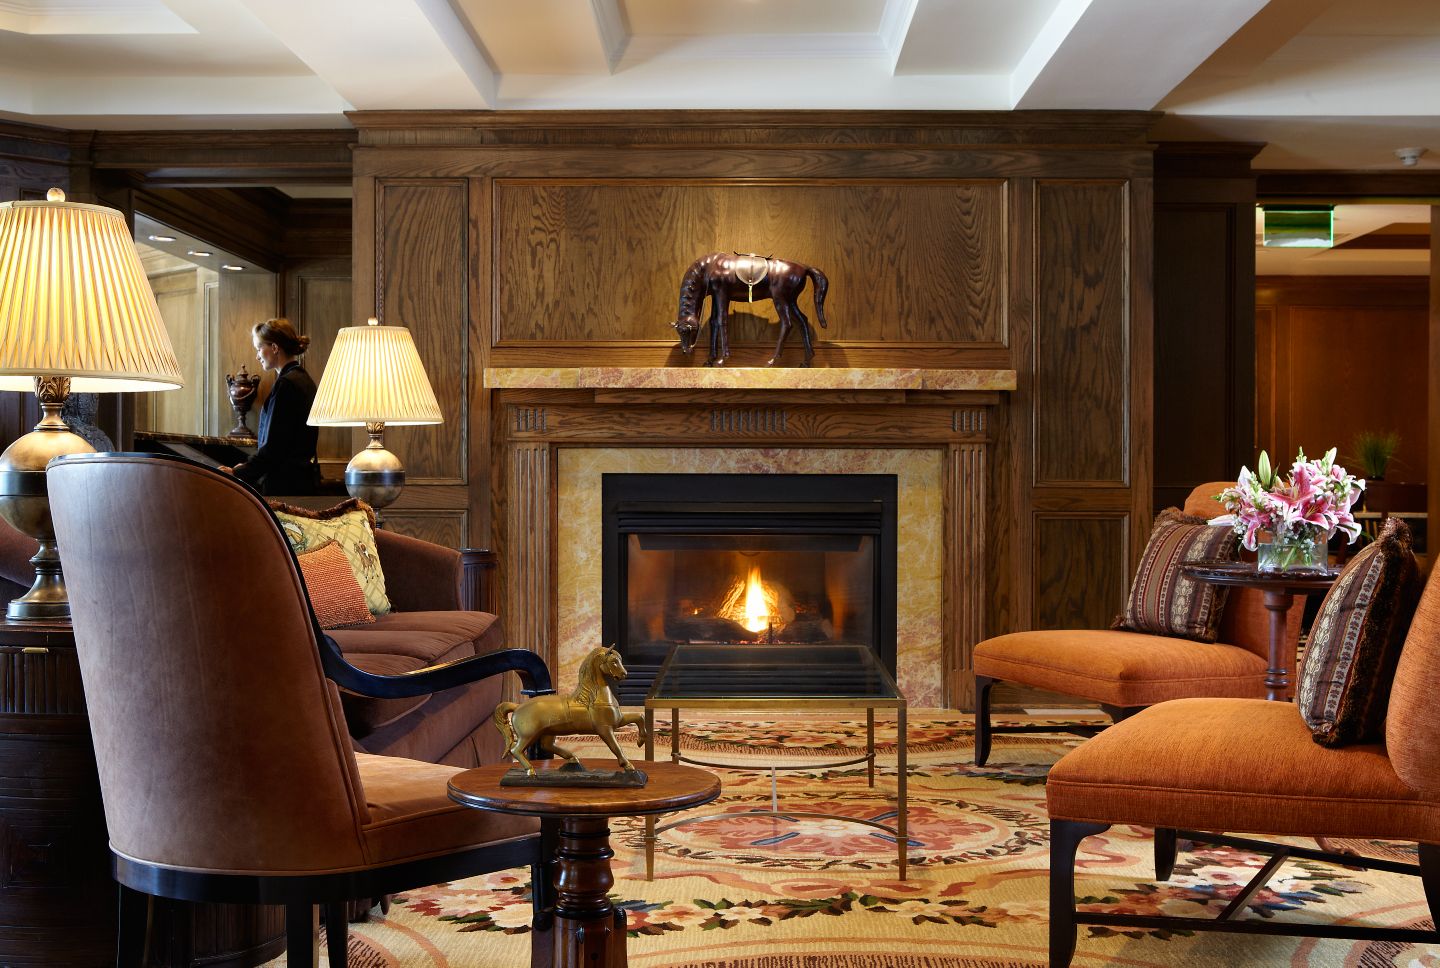 A woman checks into the hotel near the fireplace surrounded by orange chairs